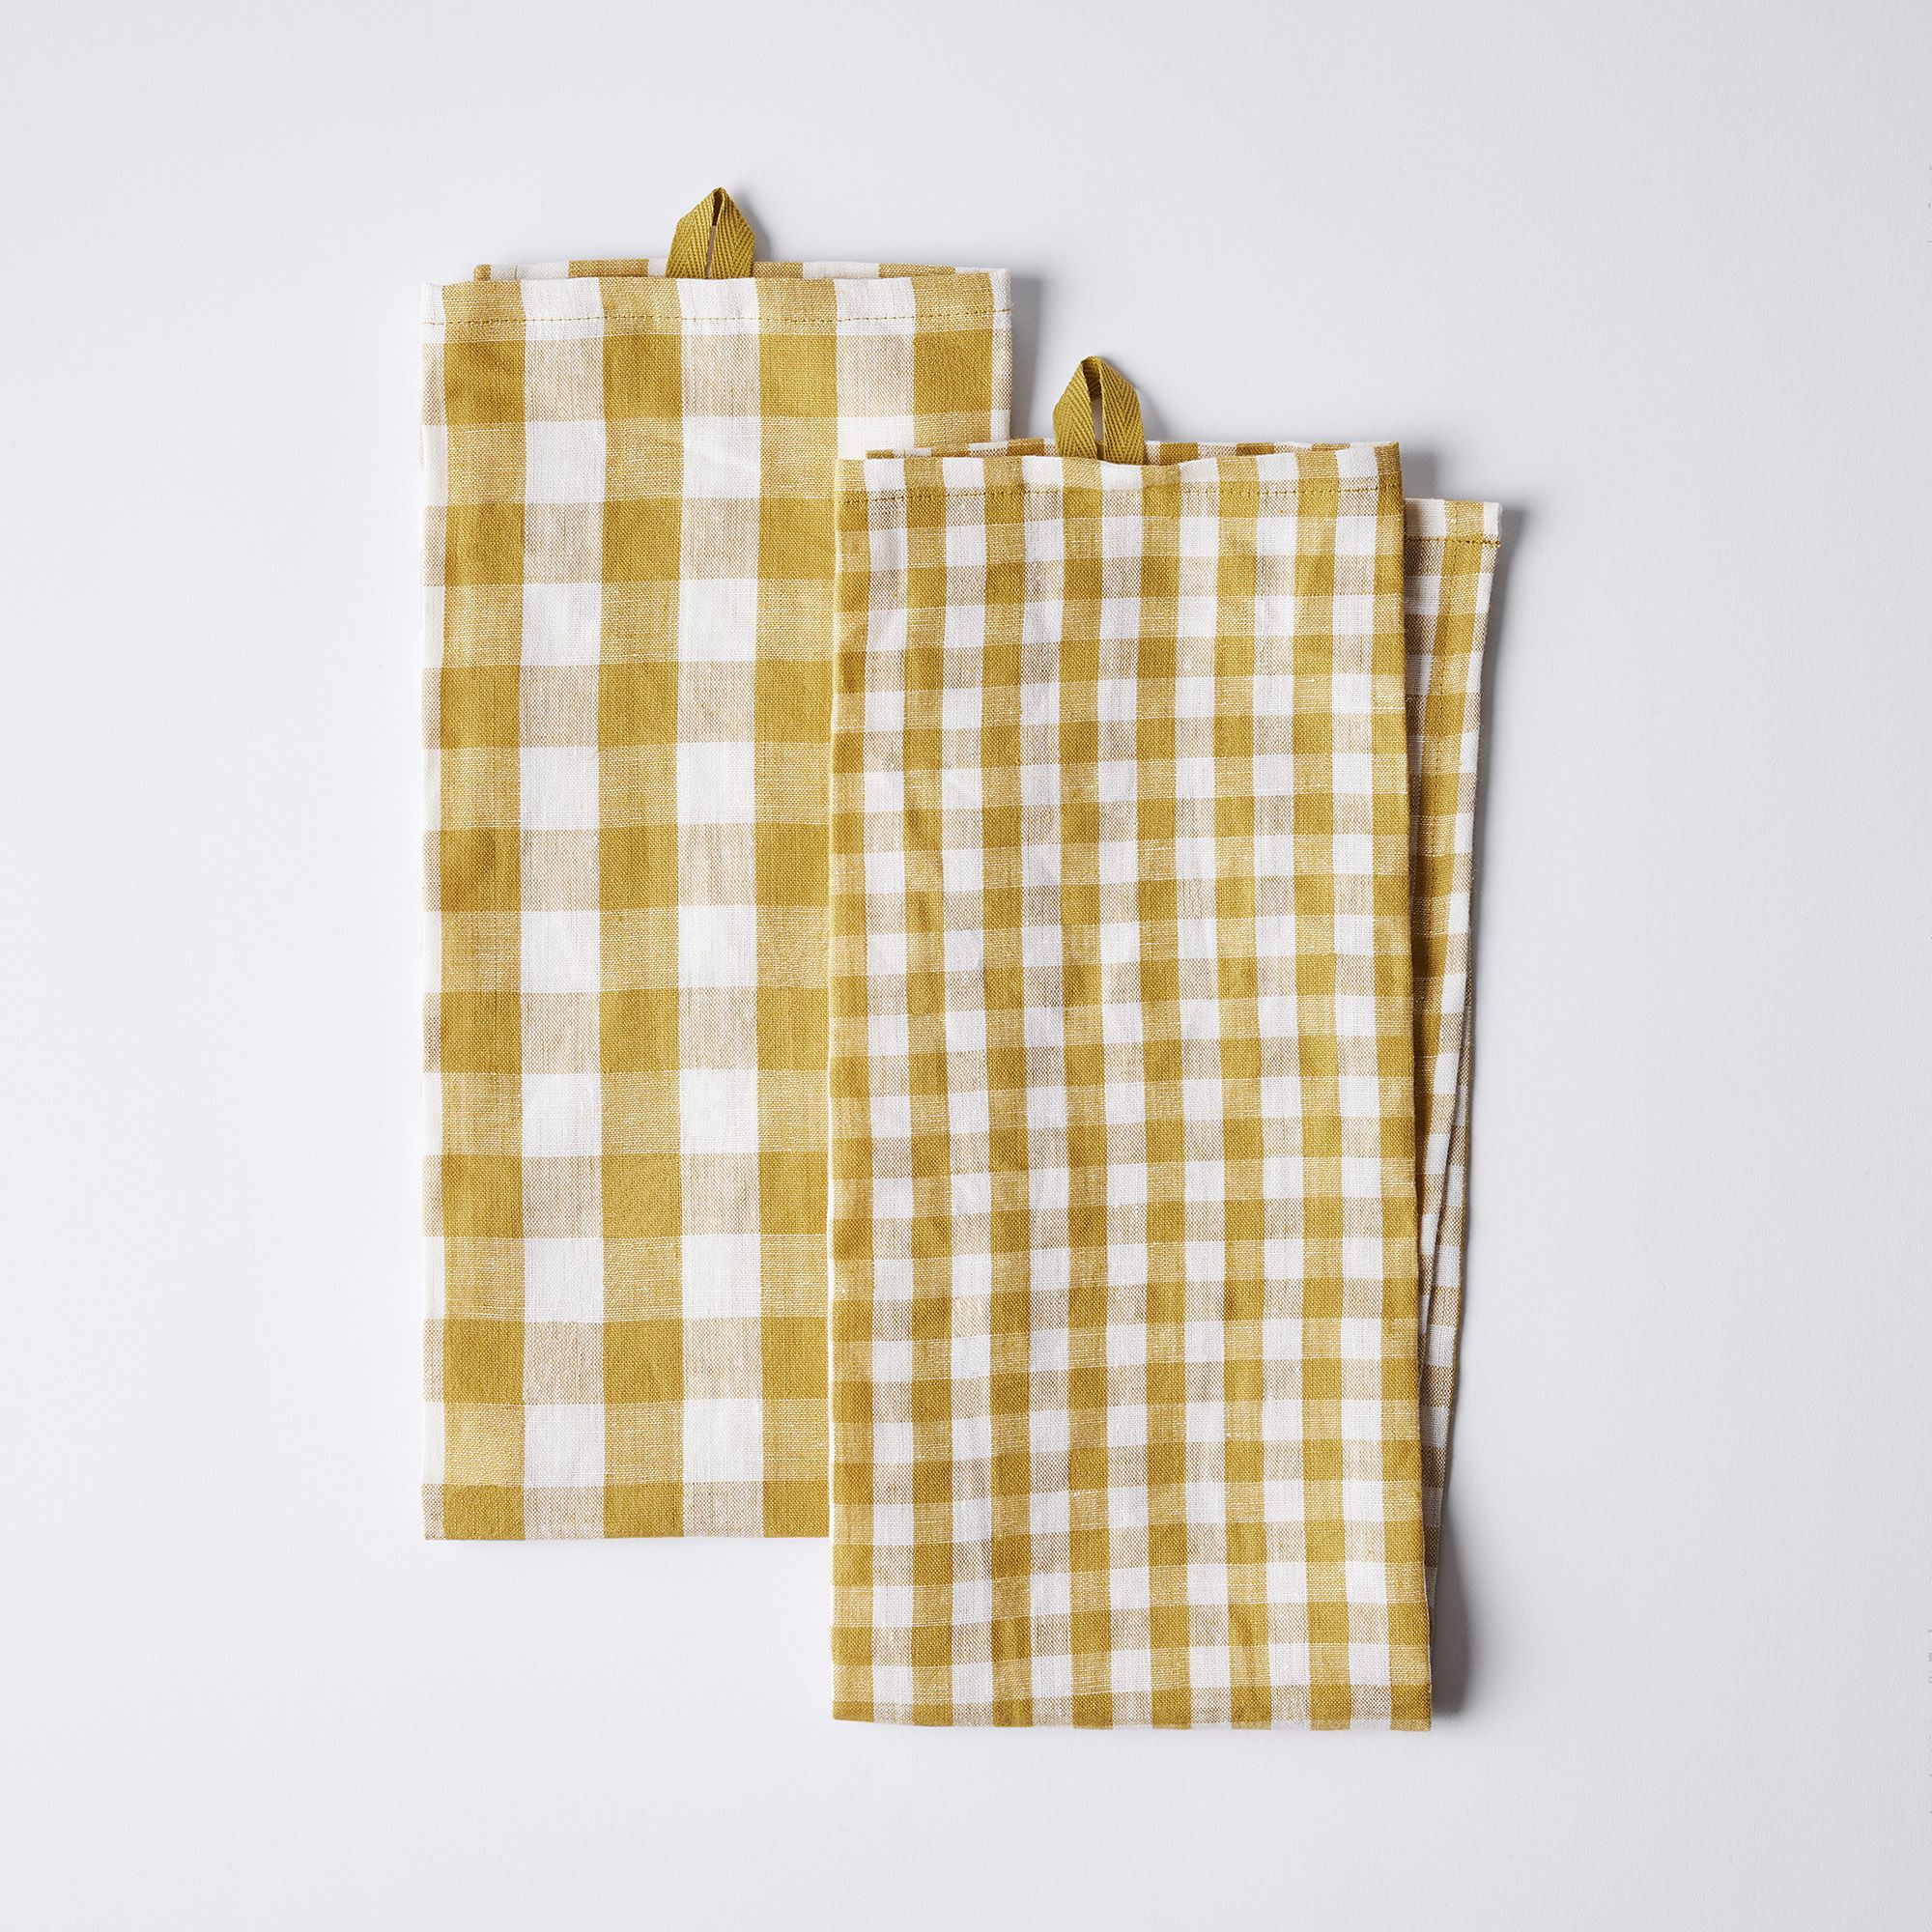 Food52 Gingham Linen Oven Mitts (Set of 2) - Olive